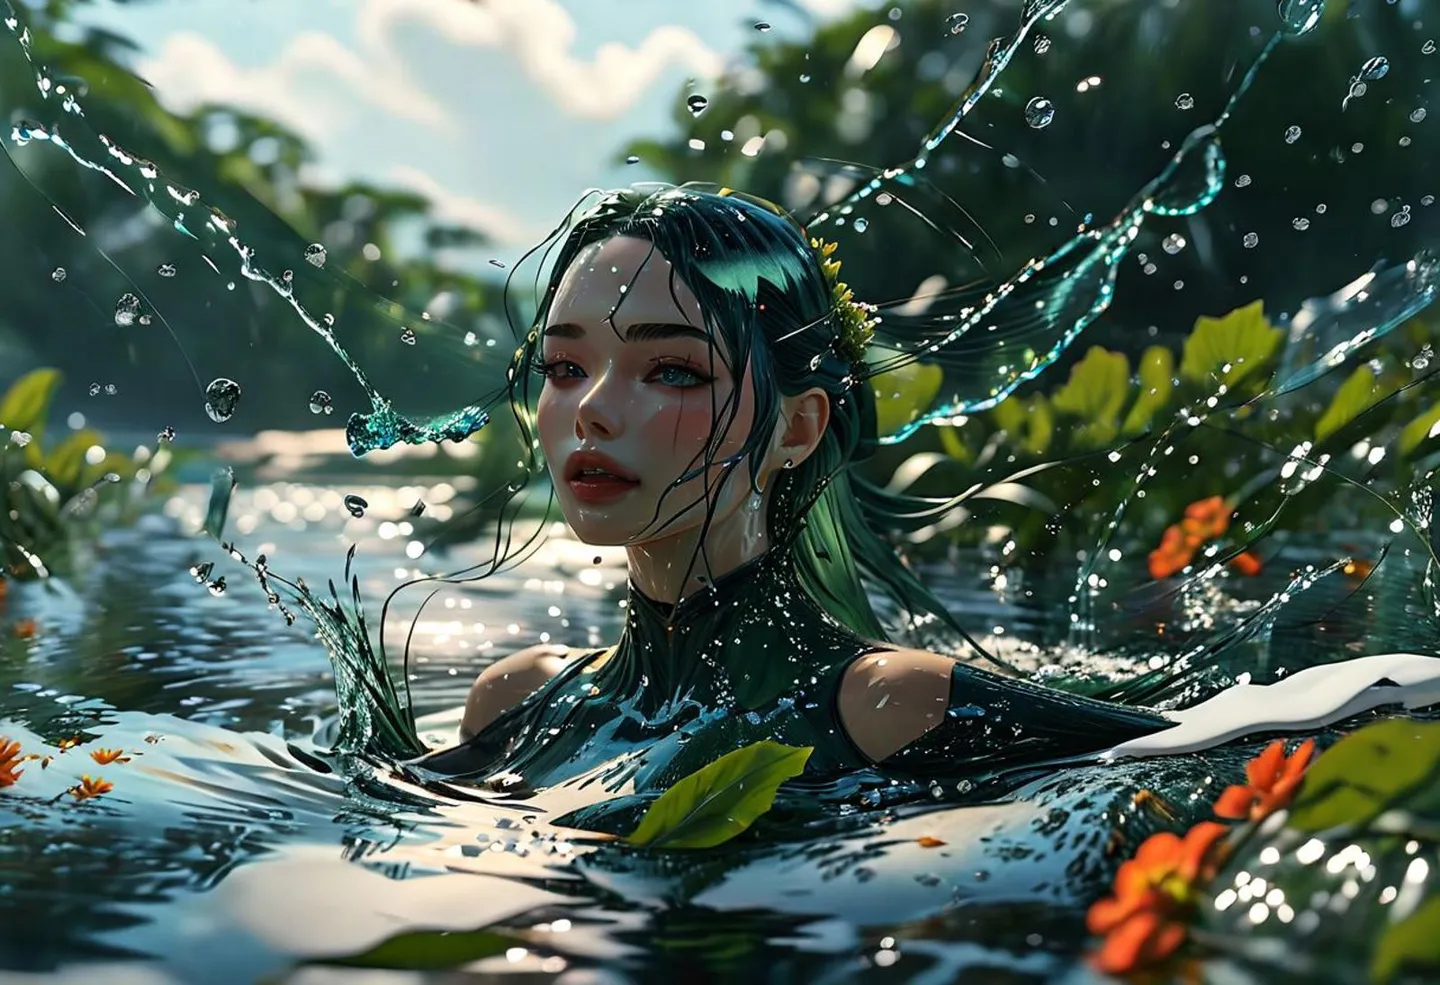 Nature goddess with water flowing around her in vibrant fantasy art scene, AI generated using Stable Diffusion.